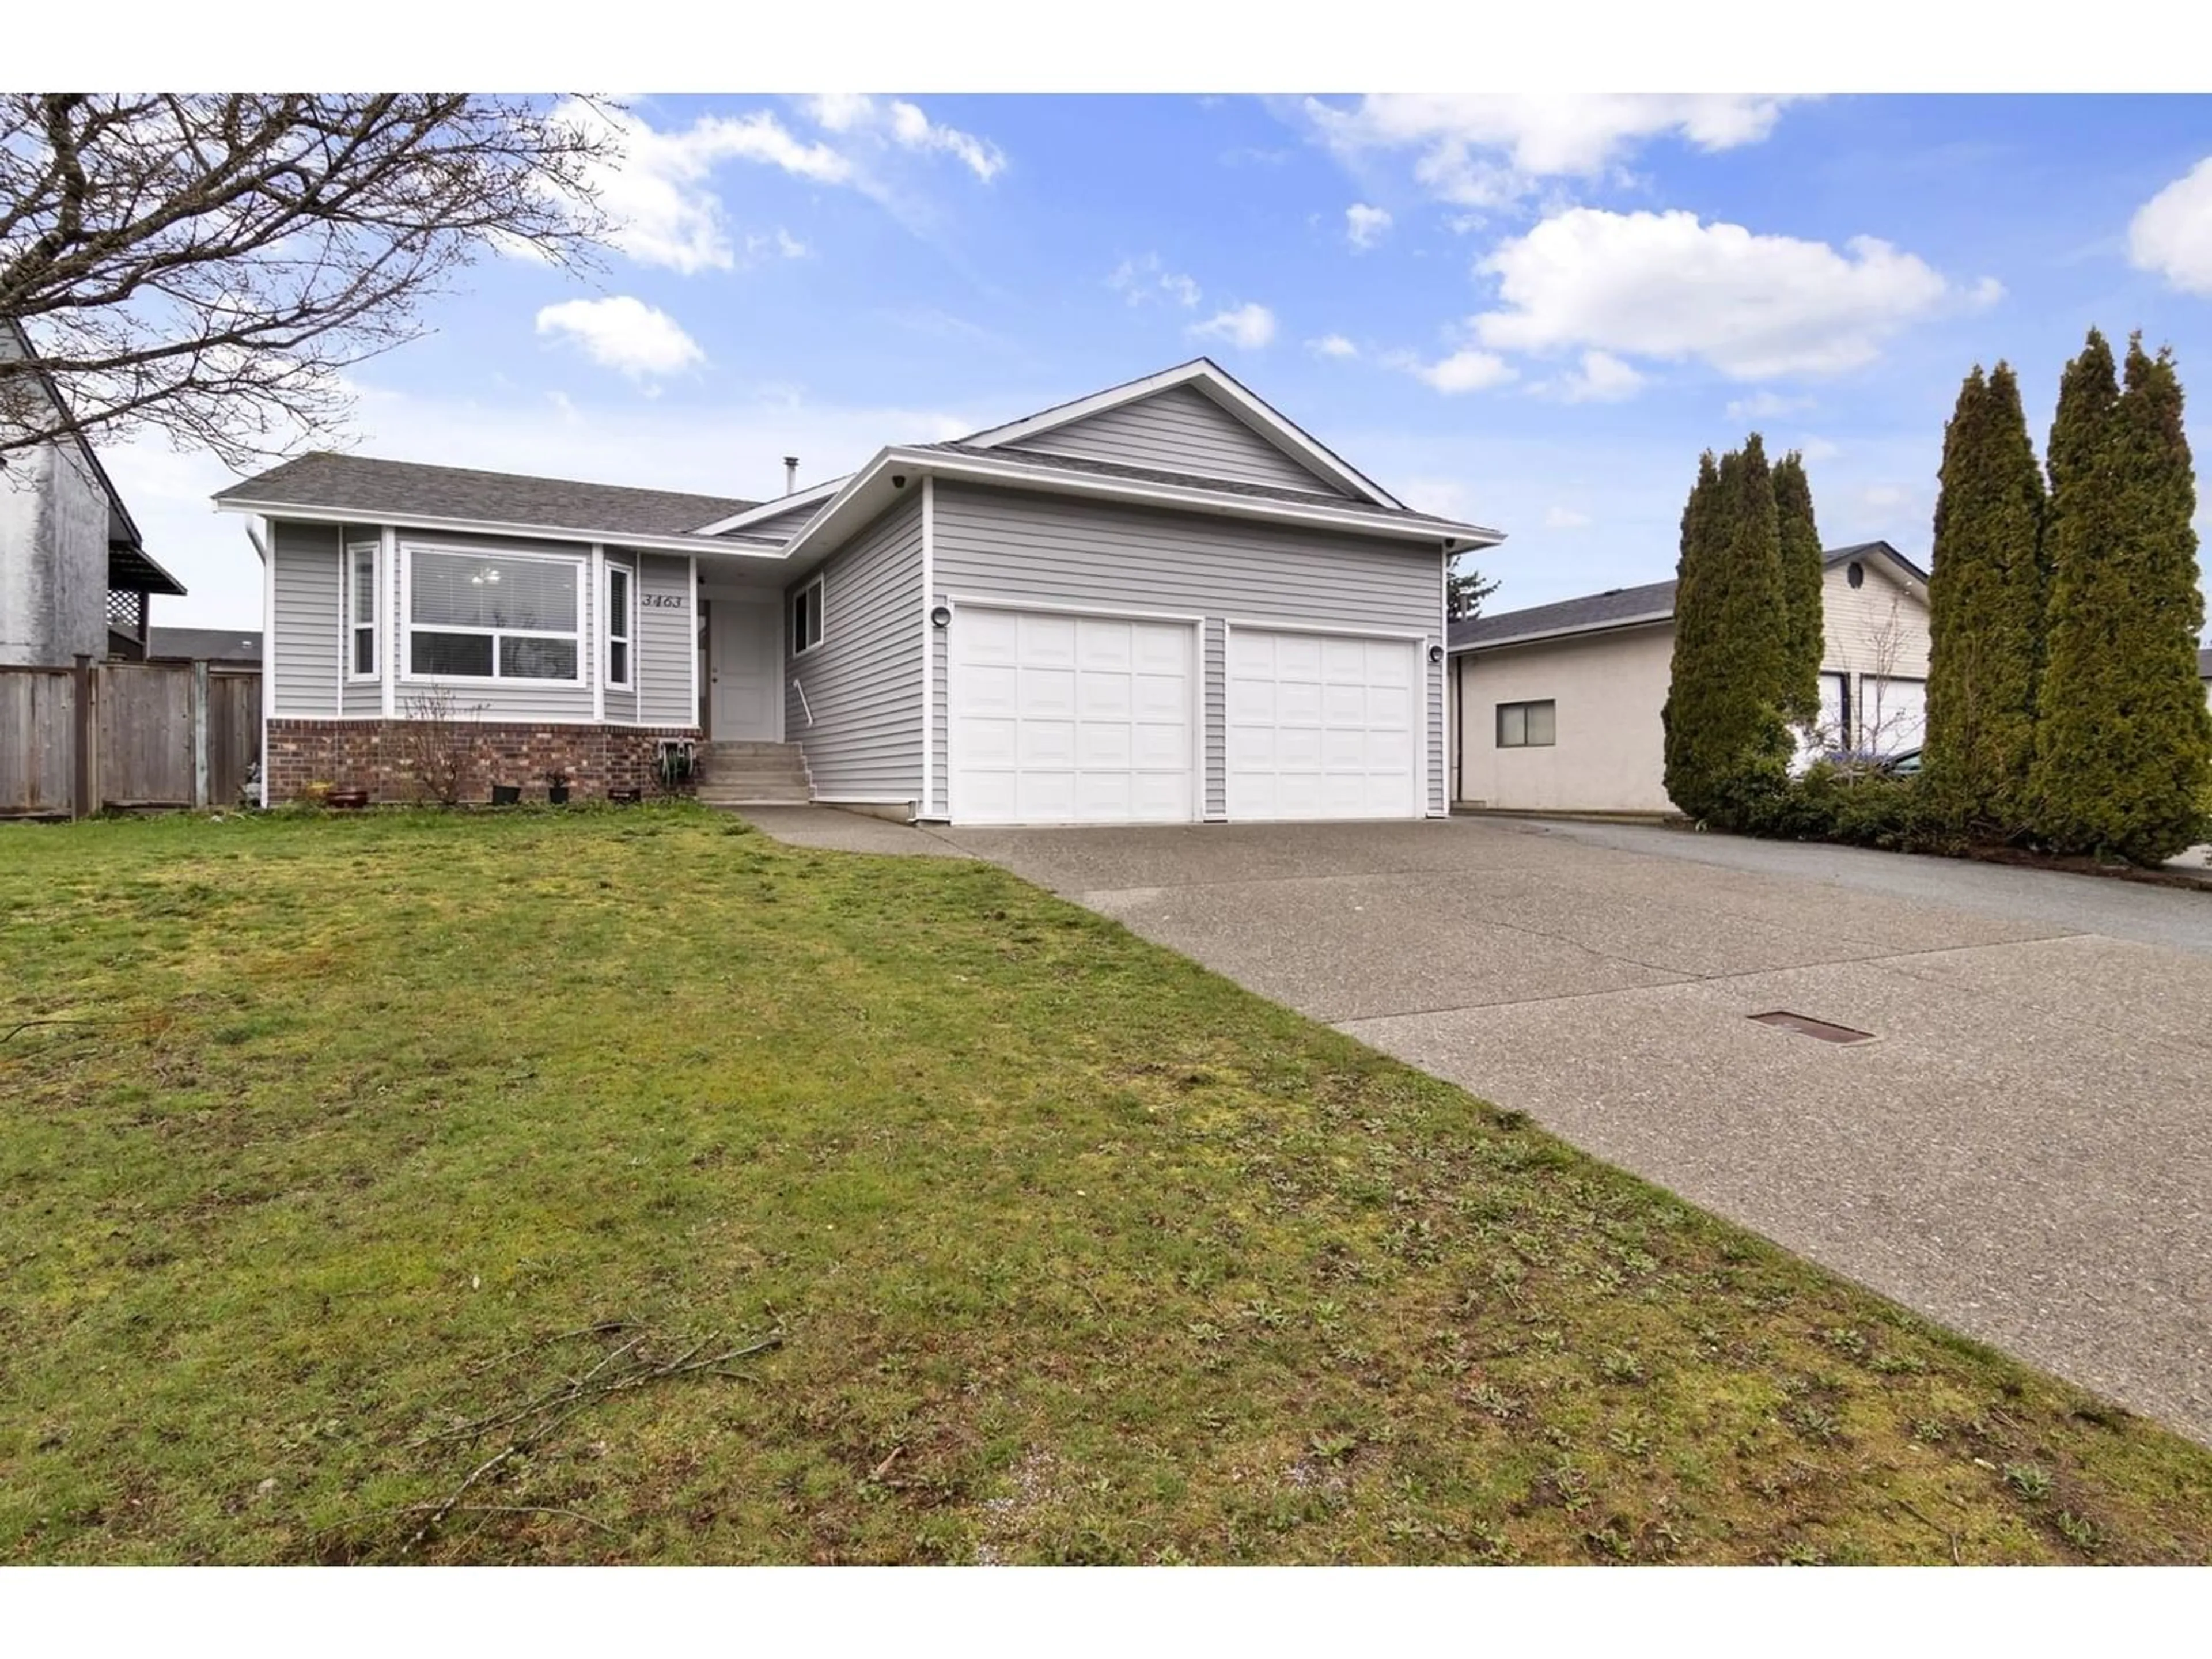 Frontside or backside of a home for 3463 SAANICH STREET, Abbotsford British Columbia V2T4Z3